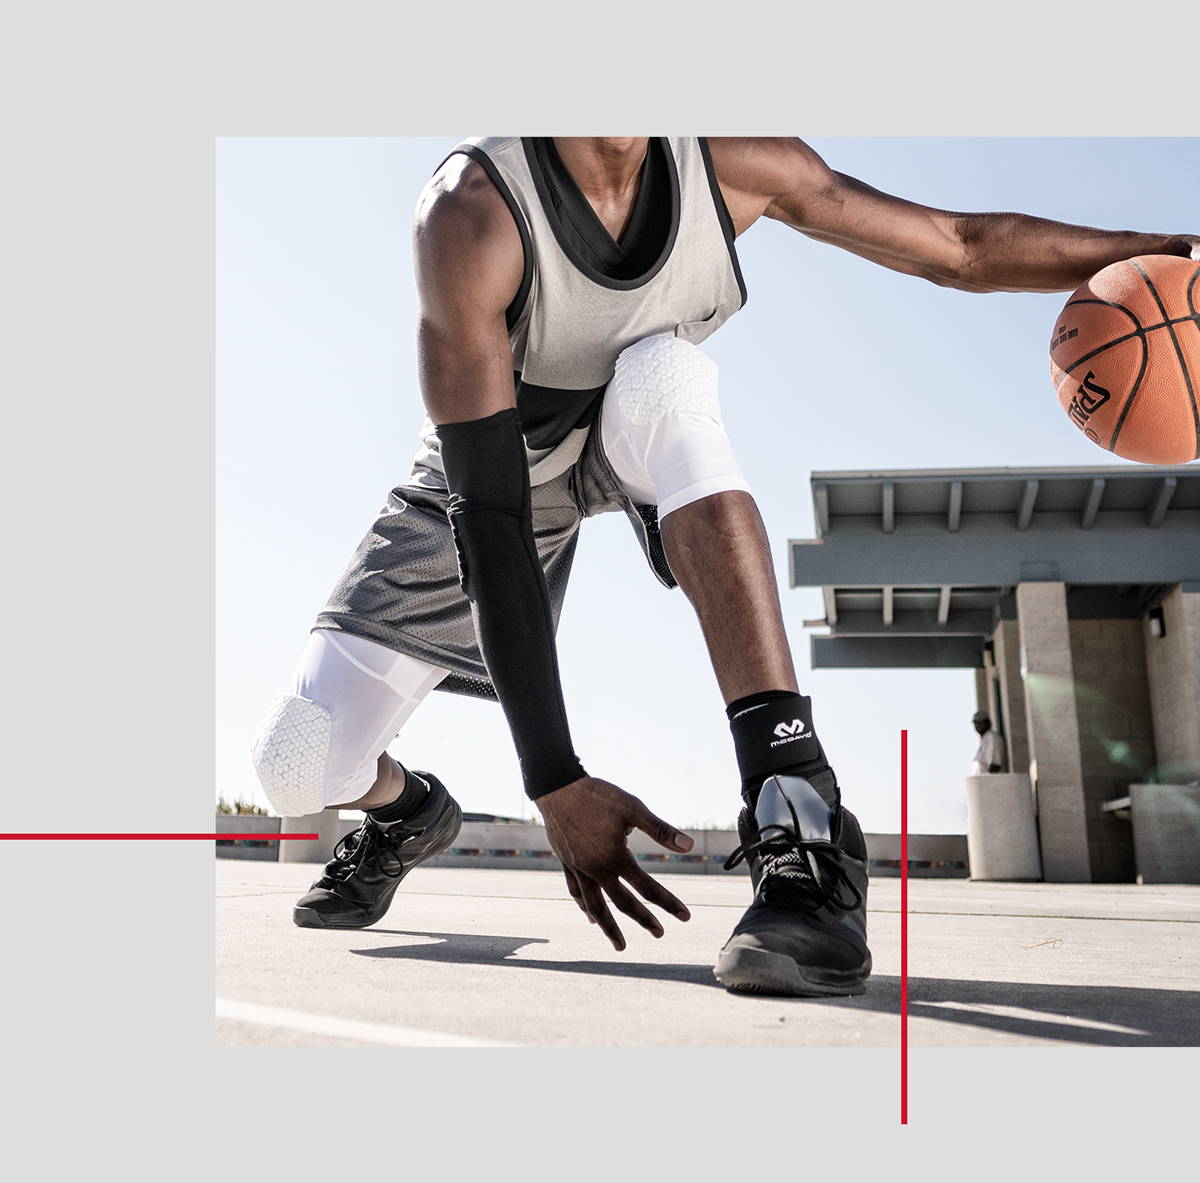 The Best Ankle Braces for Basketball - McDavid